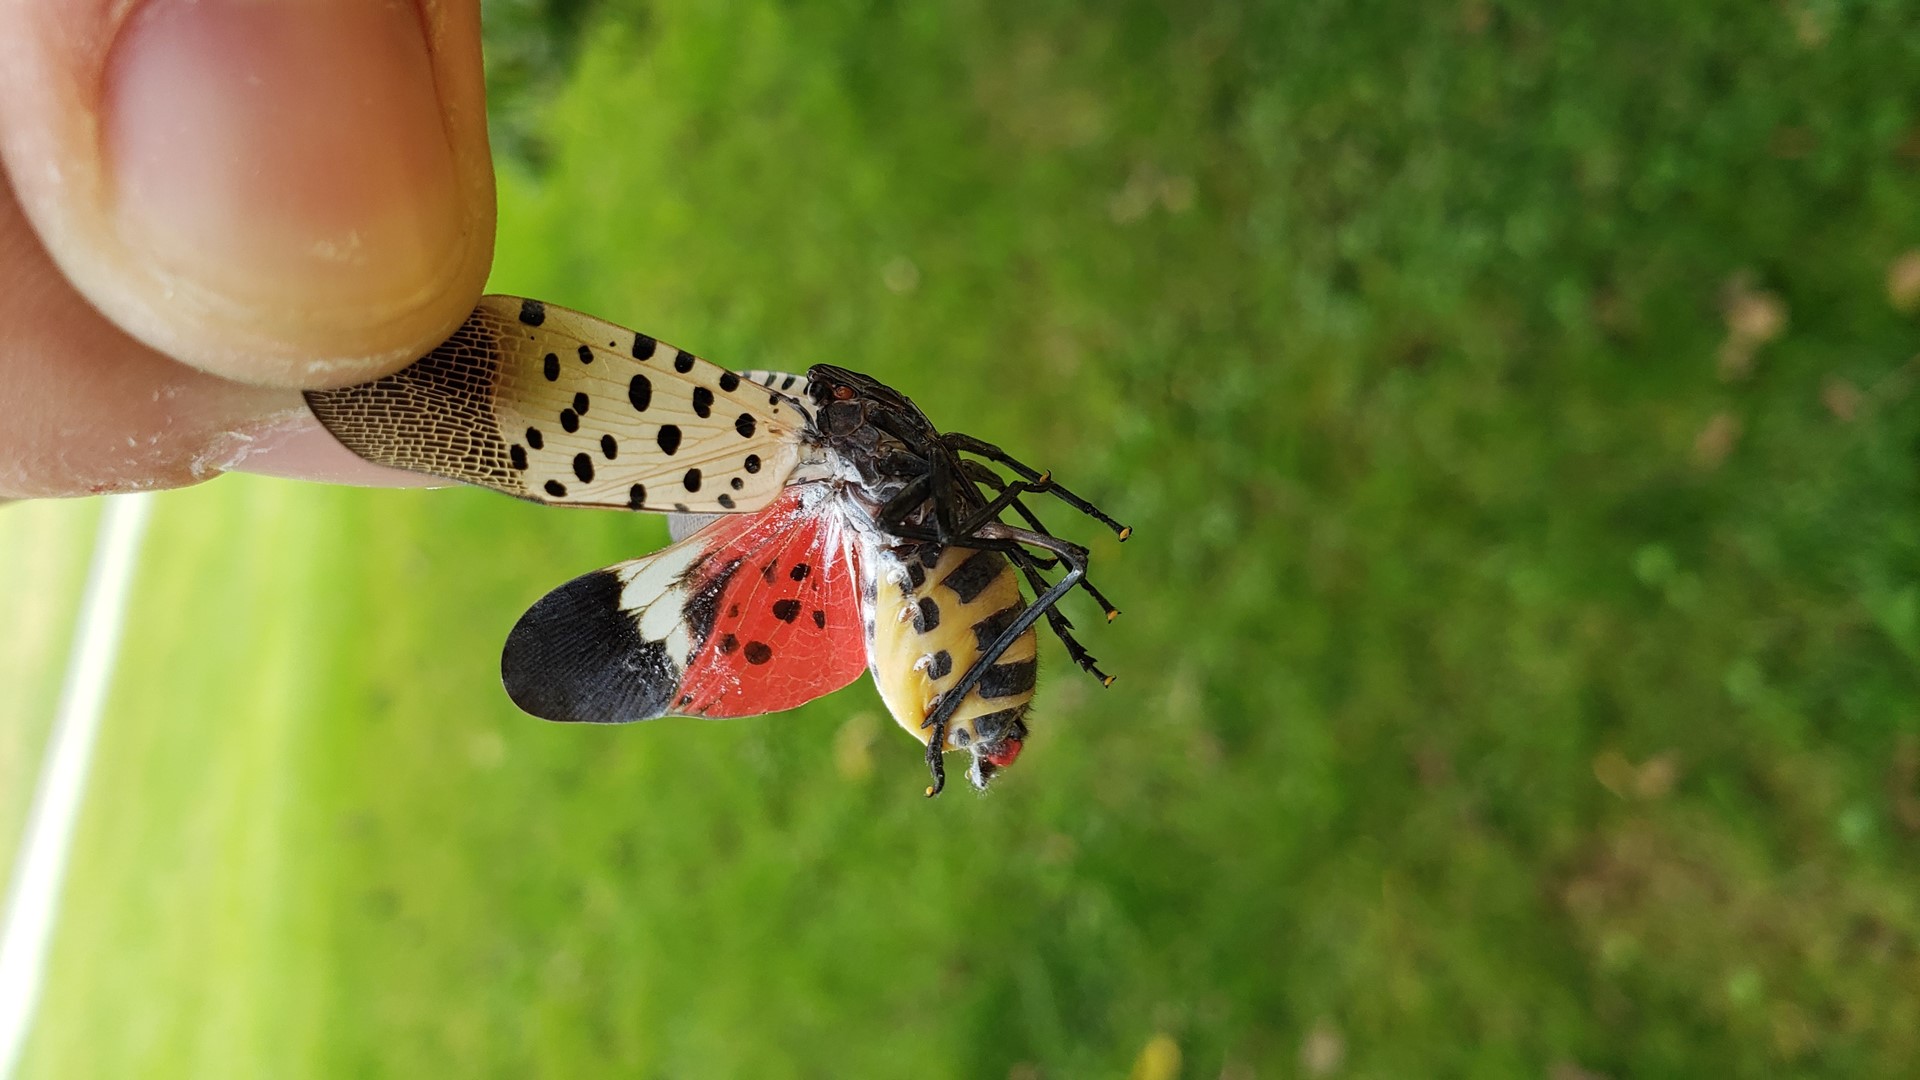 Spotted lanternflies are a threat to trees and fruit crops and has cost millions to Pennsylvania's economy.